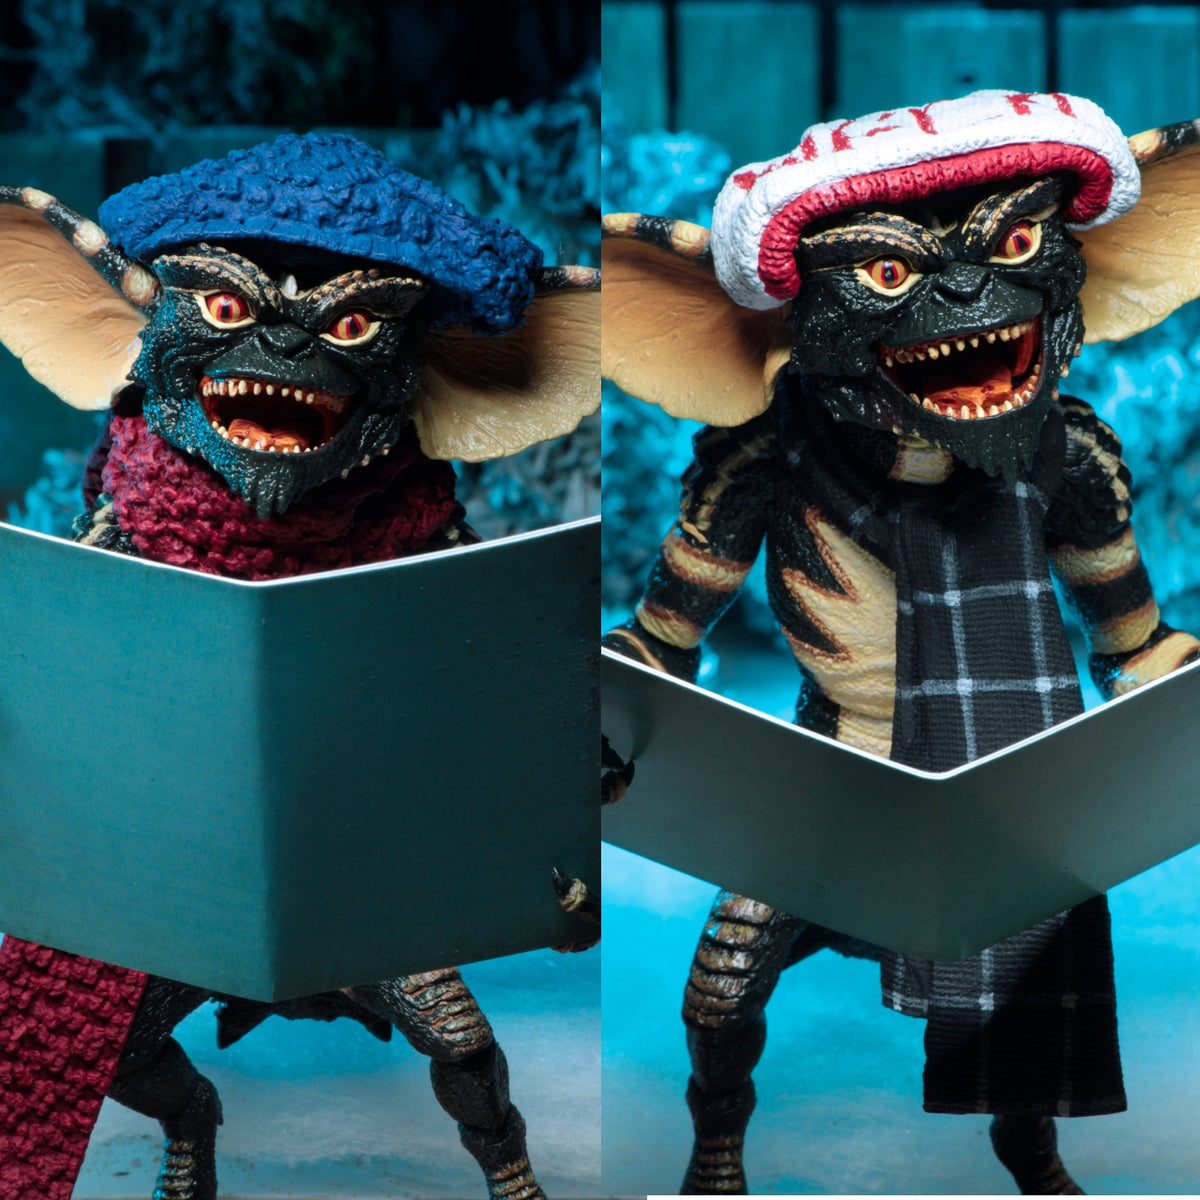 NECA Reel Toys Gremlins Stripe Action Figure with Accessories